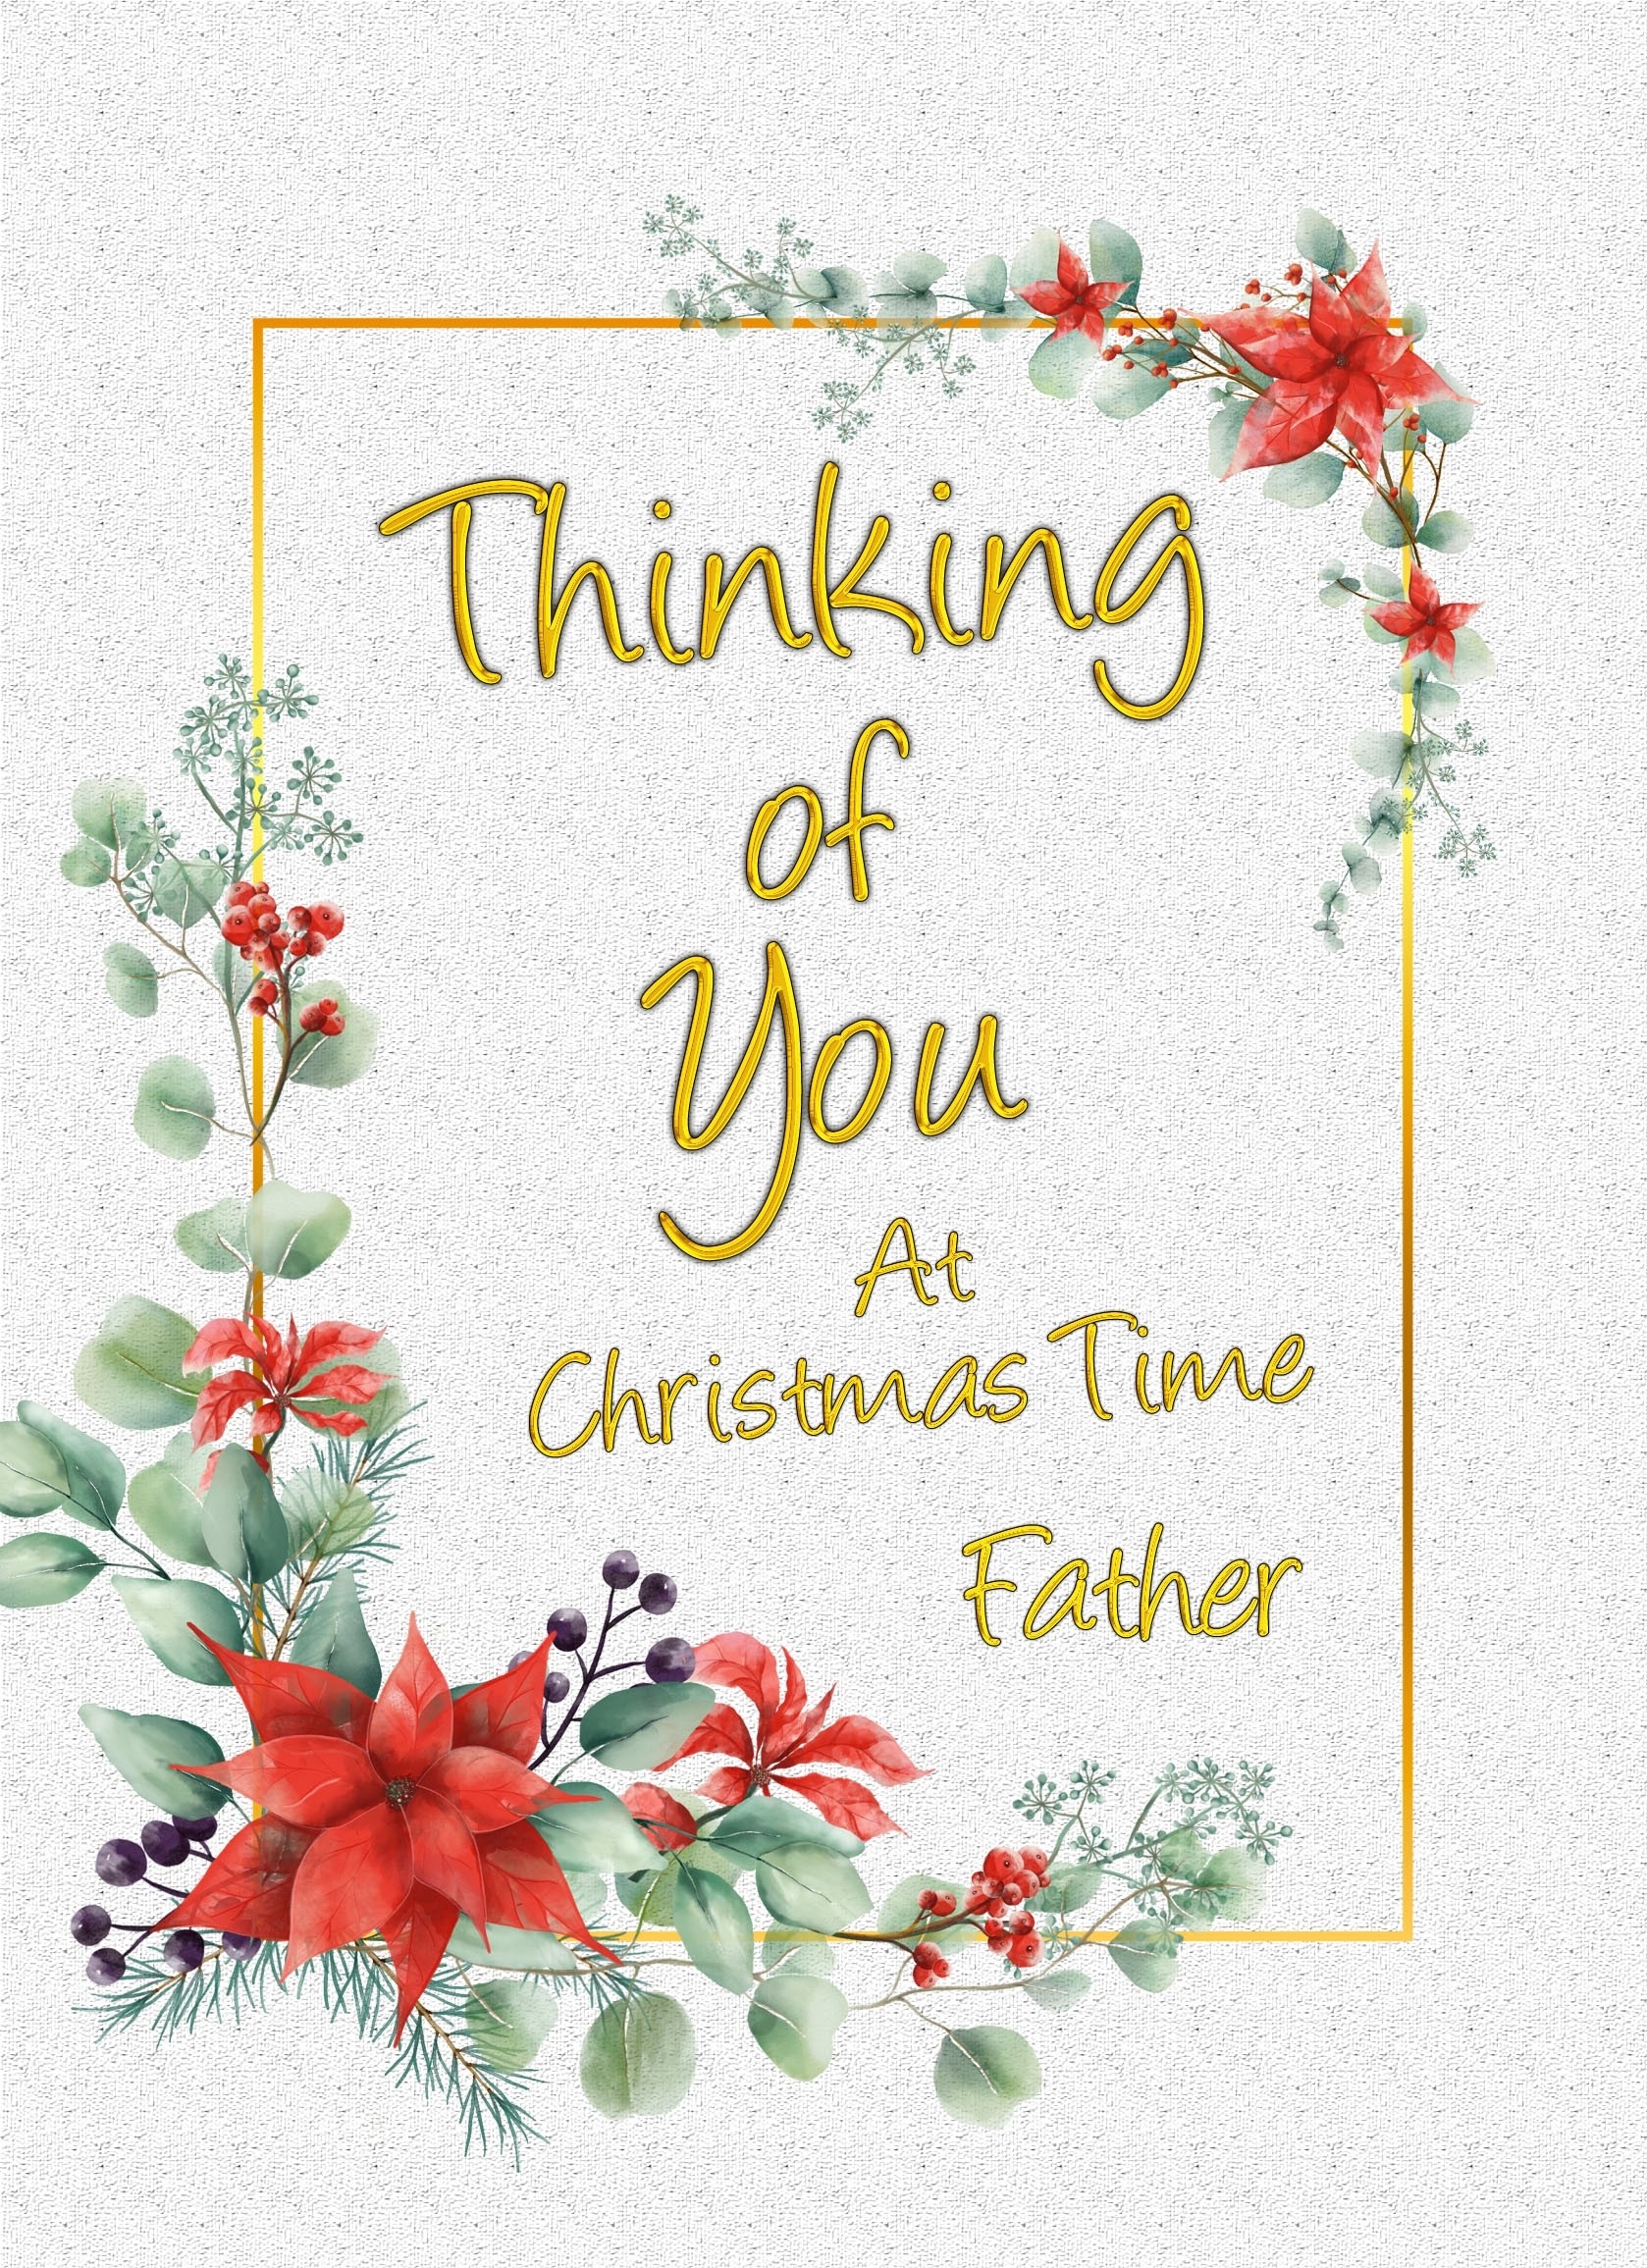 Thinking of You at Christmas Card For Father